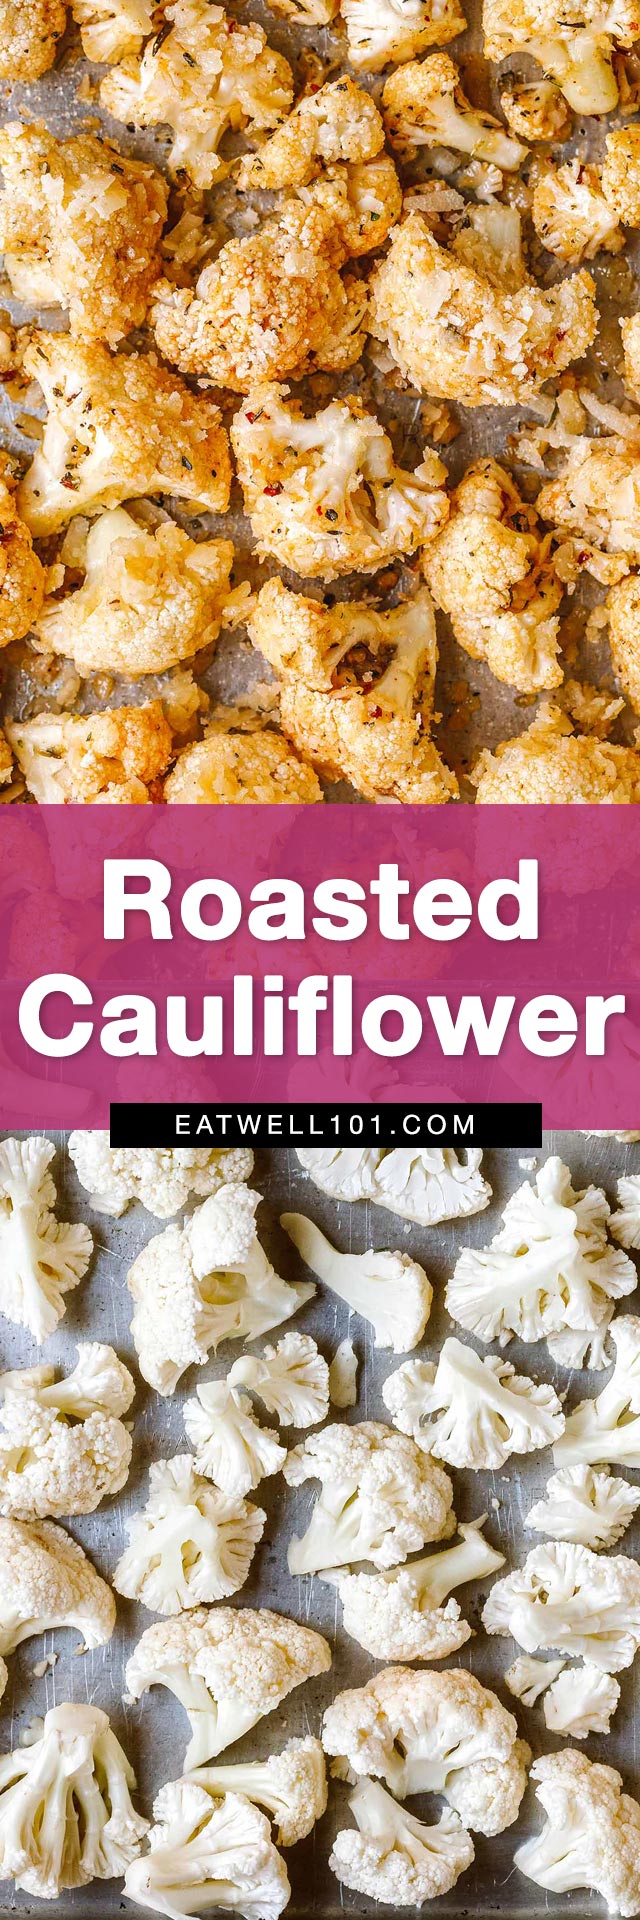 Garlic Parmesan Roasted Cauliflower - #roasted #cauliflower #recipe #eatwell101 -  delicious side dish with garlic, olive oil and parmesan cheese to add a tasty veggie touch to your dinner menu!